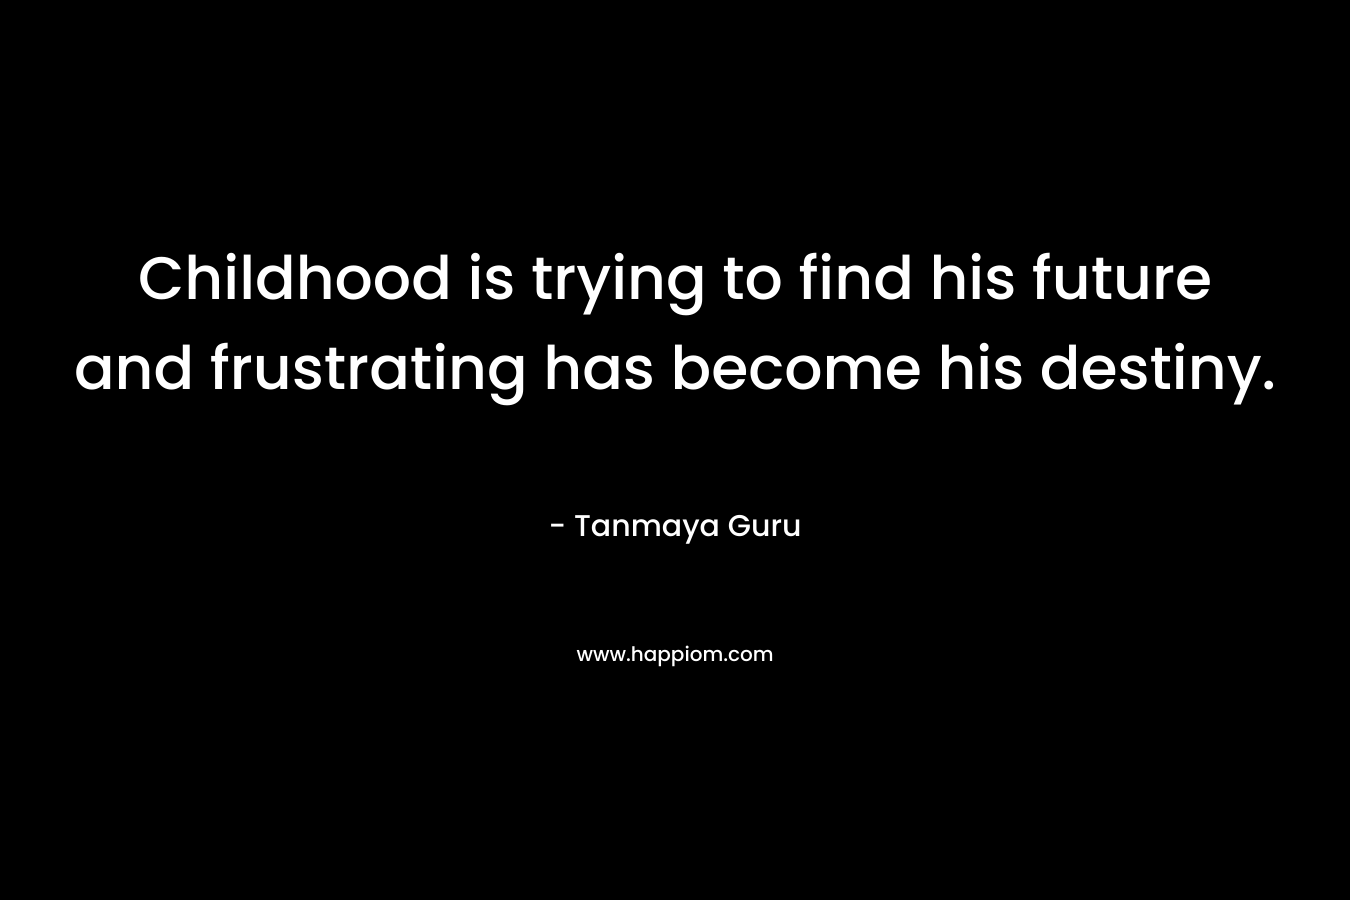 Childhood is trying to find his future and frustrating has become his destiny. – Tanmaya Guru